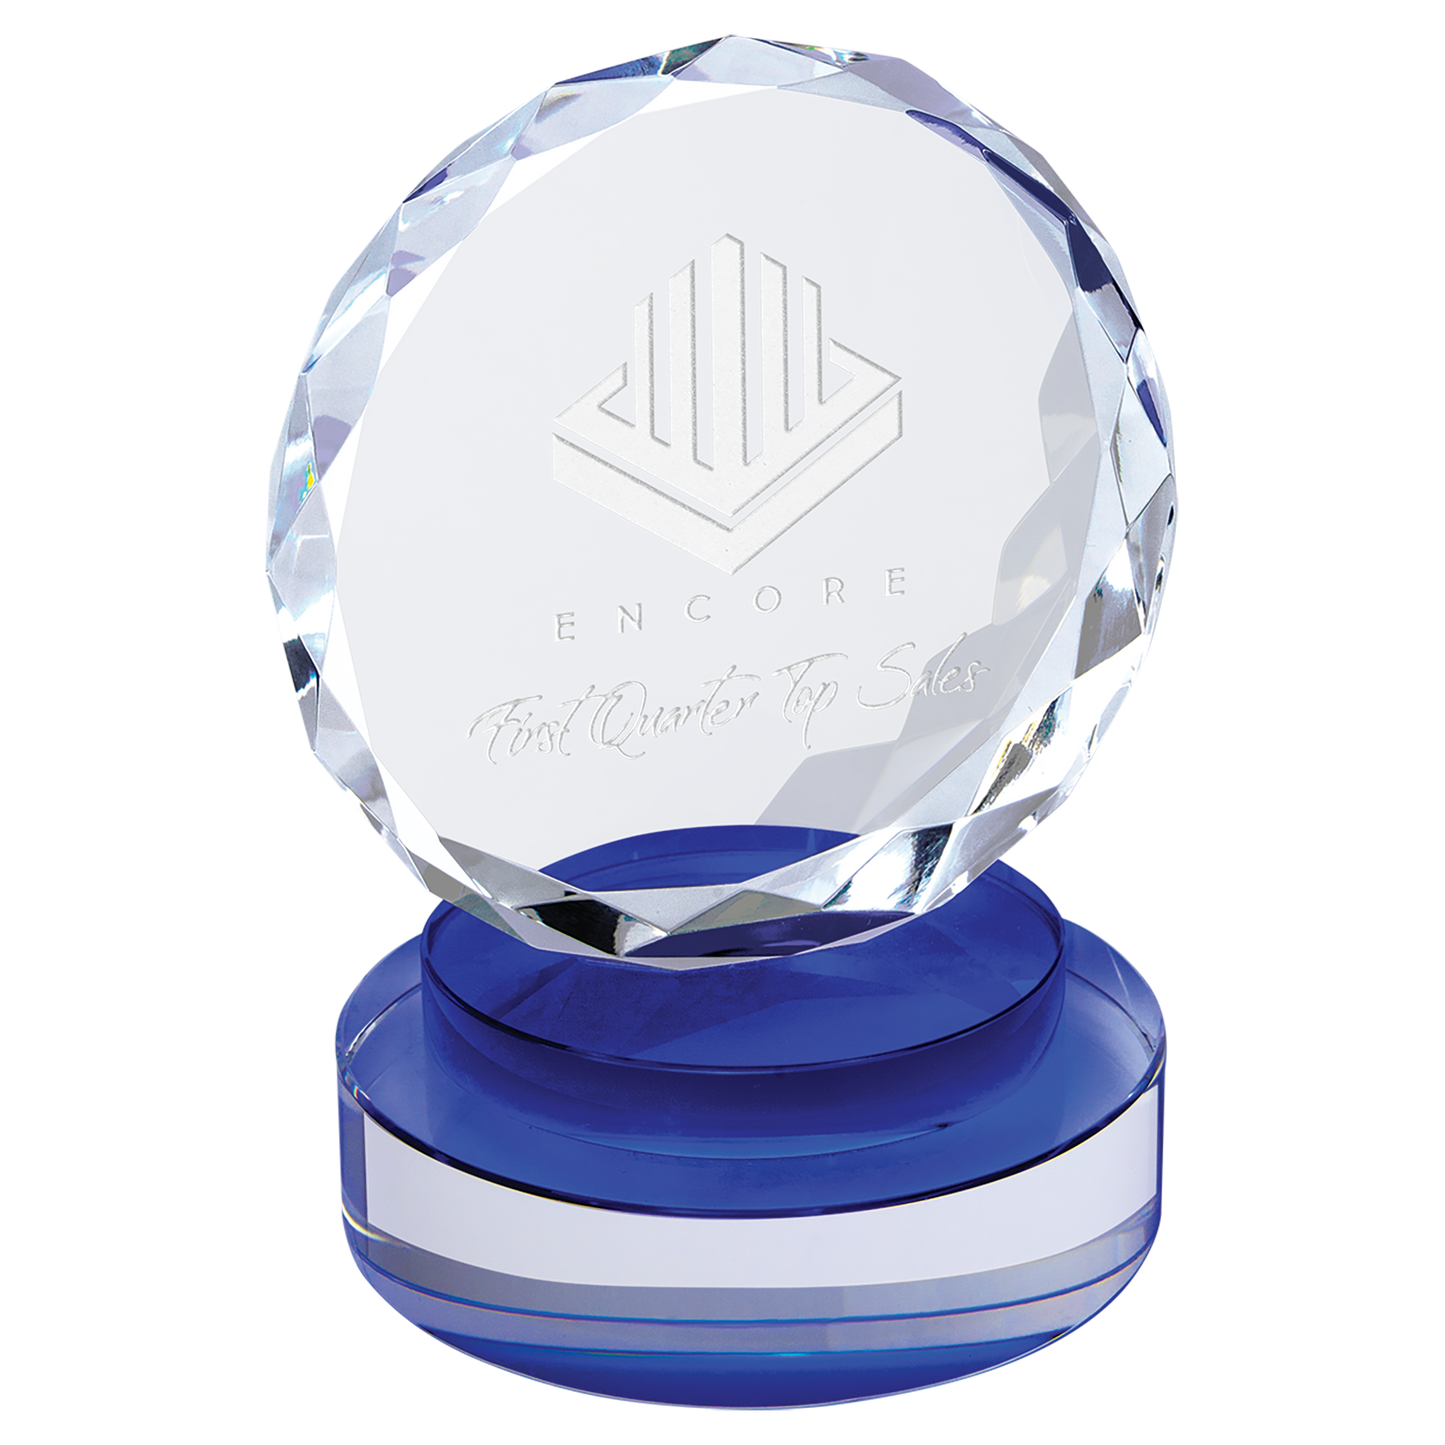 5" Round Facet Crystal on Blue & Clear Round Base Corporate Awards - Premium Crystal Awards